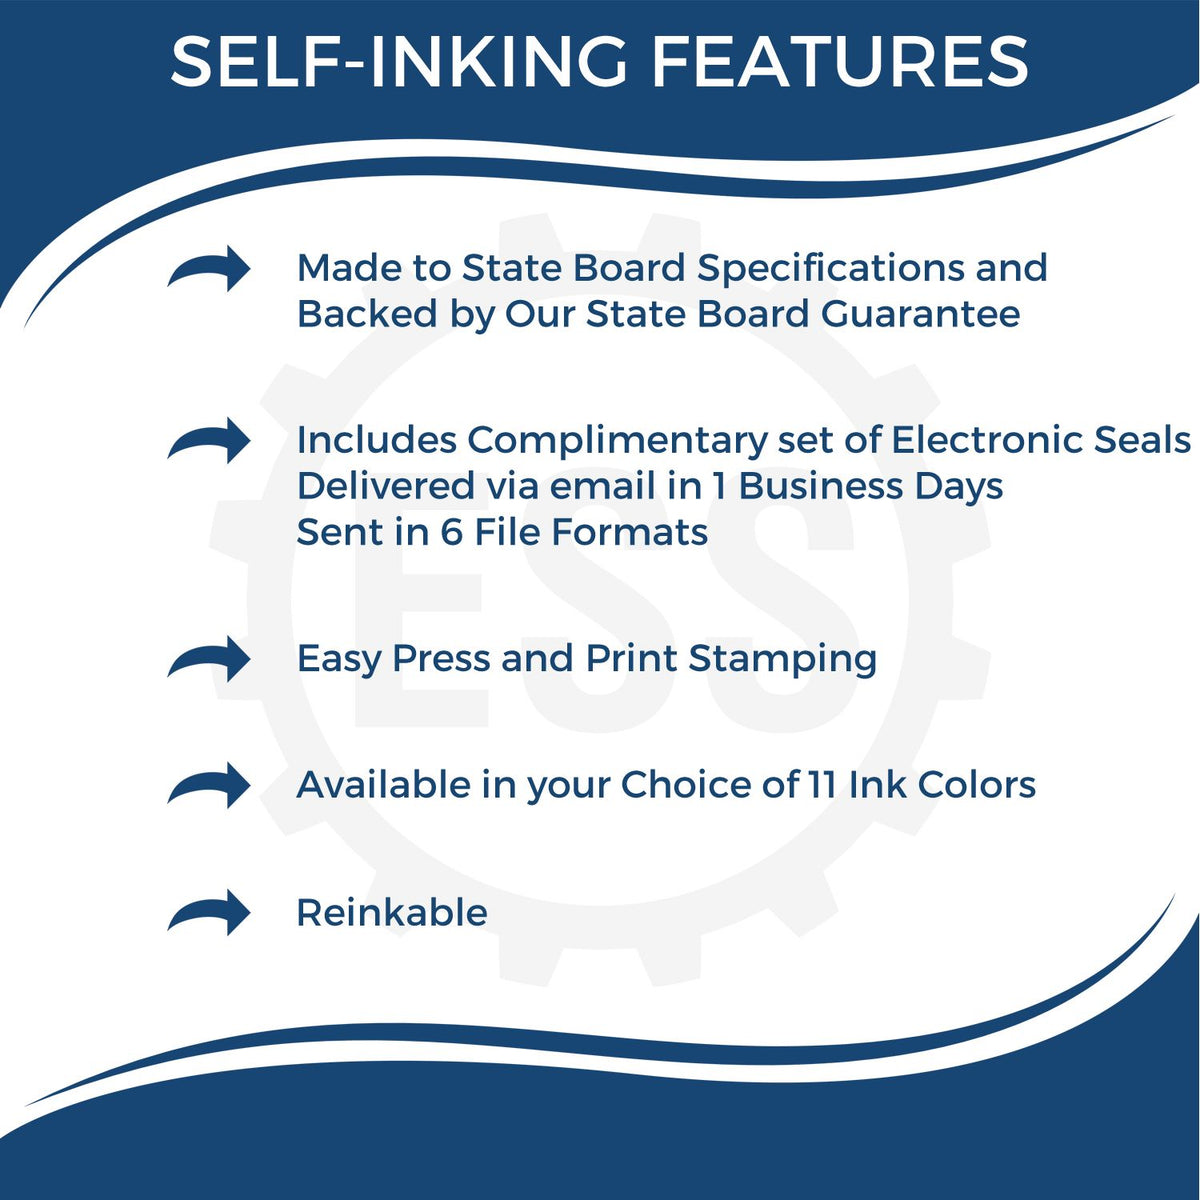 A picture of an infographic highlighting the selling points for the Self-Inking Arizona Geologist Stamp